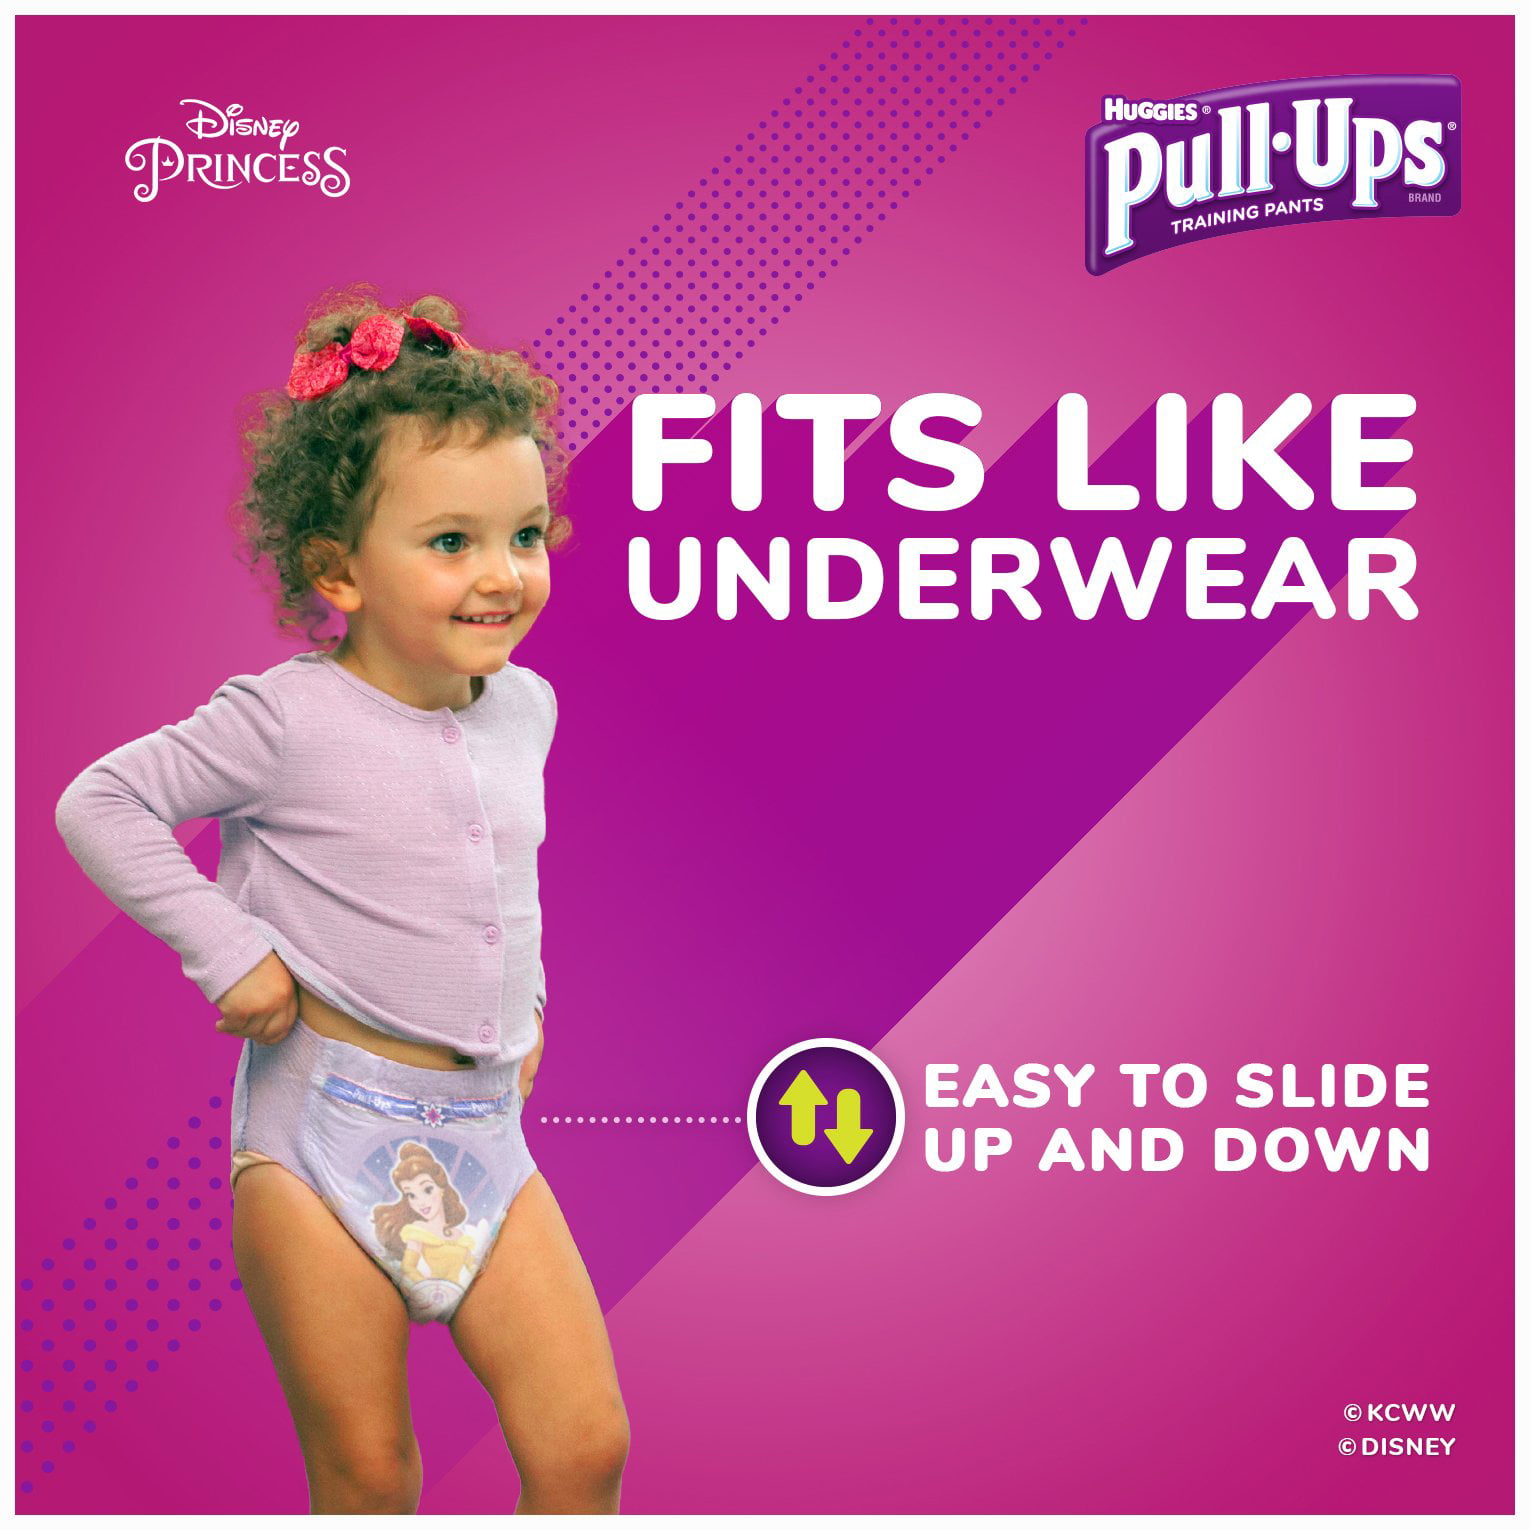 . 3T-4T 20 Ct 32-40 lb. Pull-Ups Night-Time Potty Training Pants for Girls Pack of 4 Packaging May Vary 